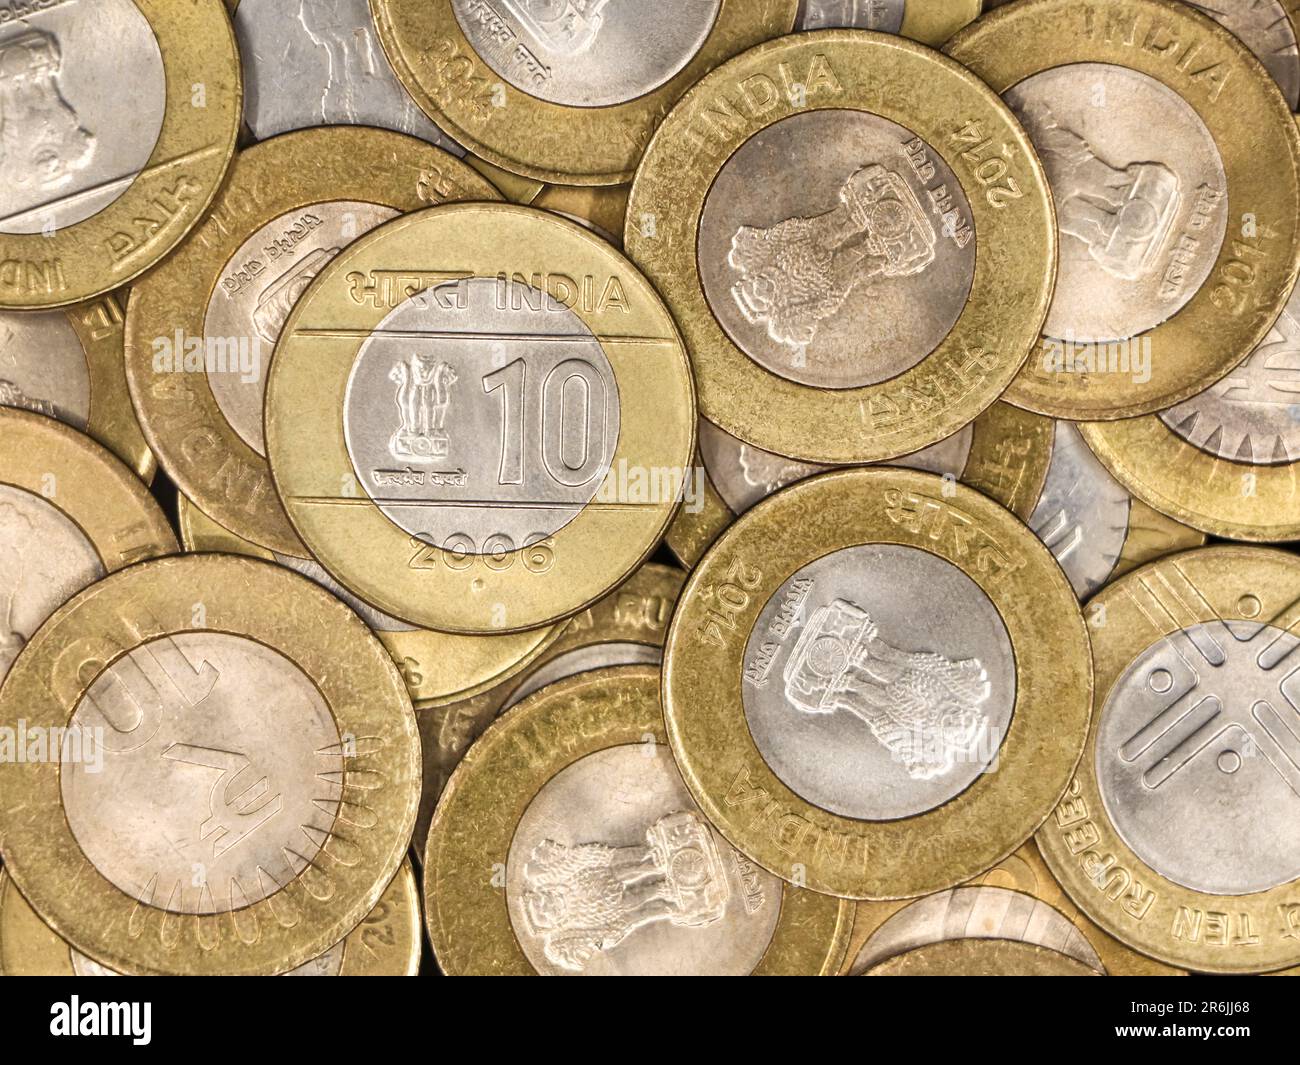 a mixed collection of rare vintage indian bimetallic 10 (ten) rupee coins gold and silver in a pile Stock Photo